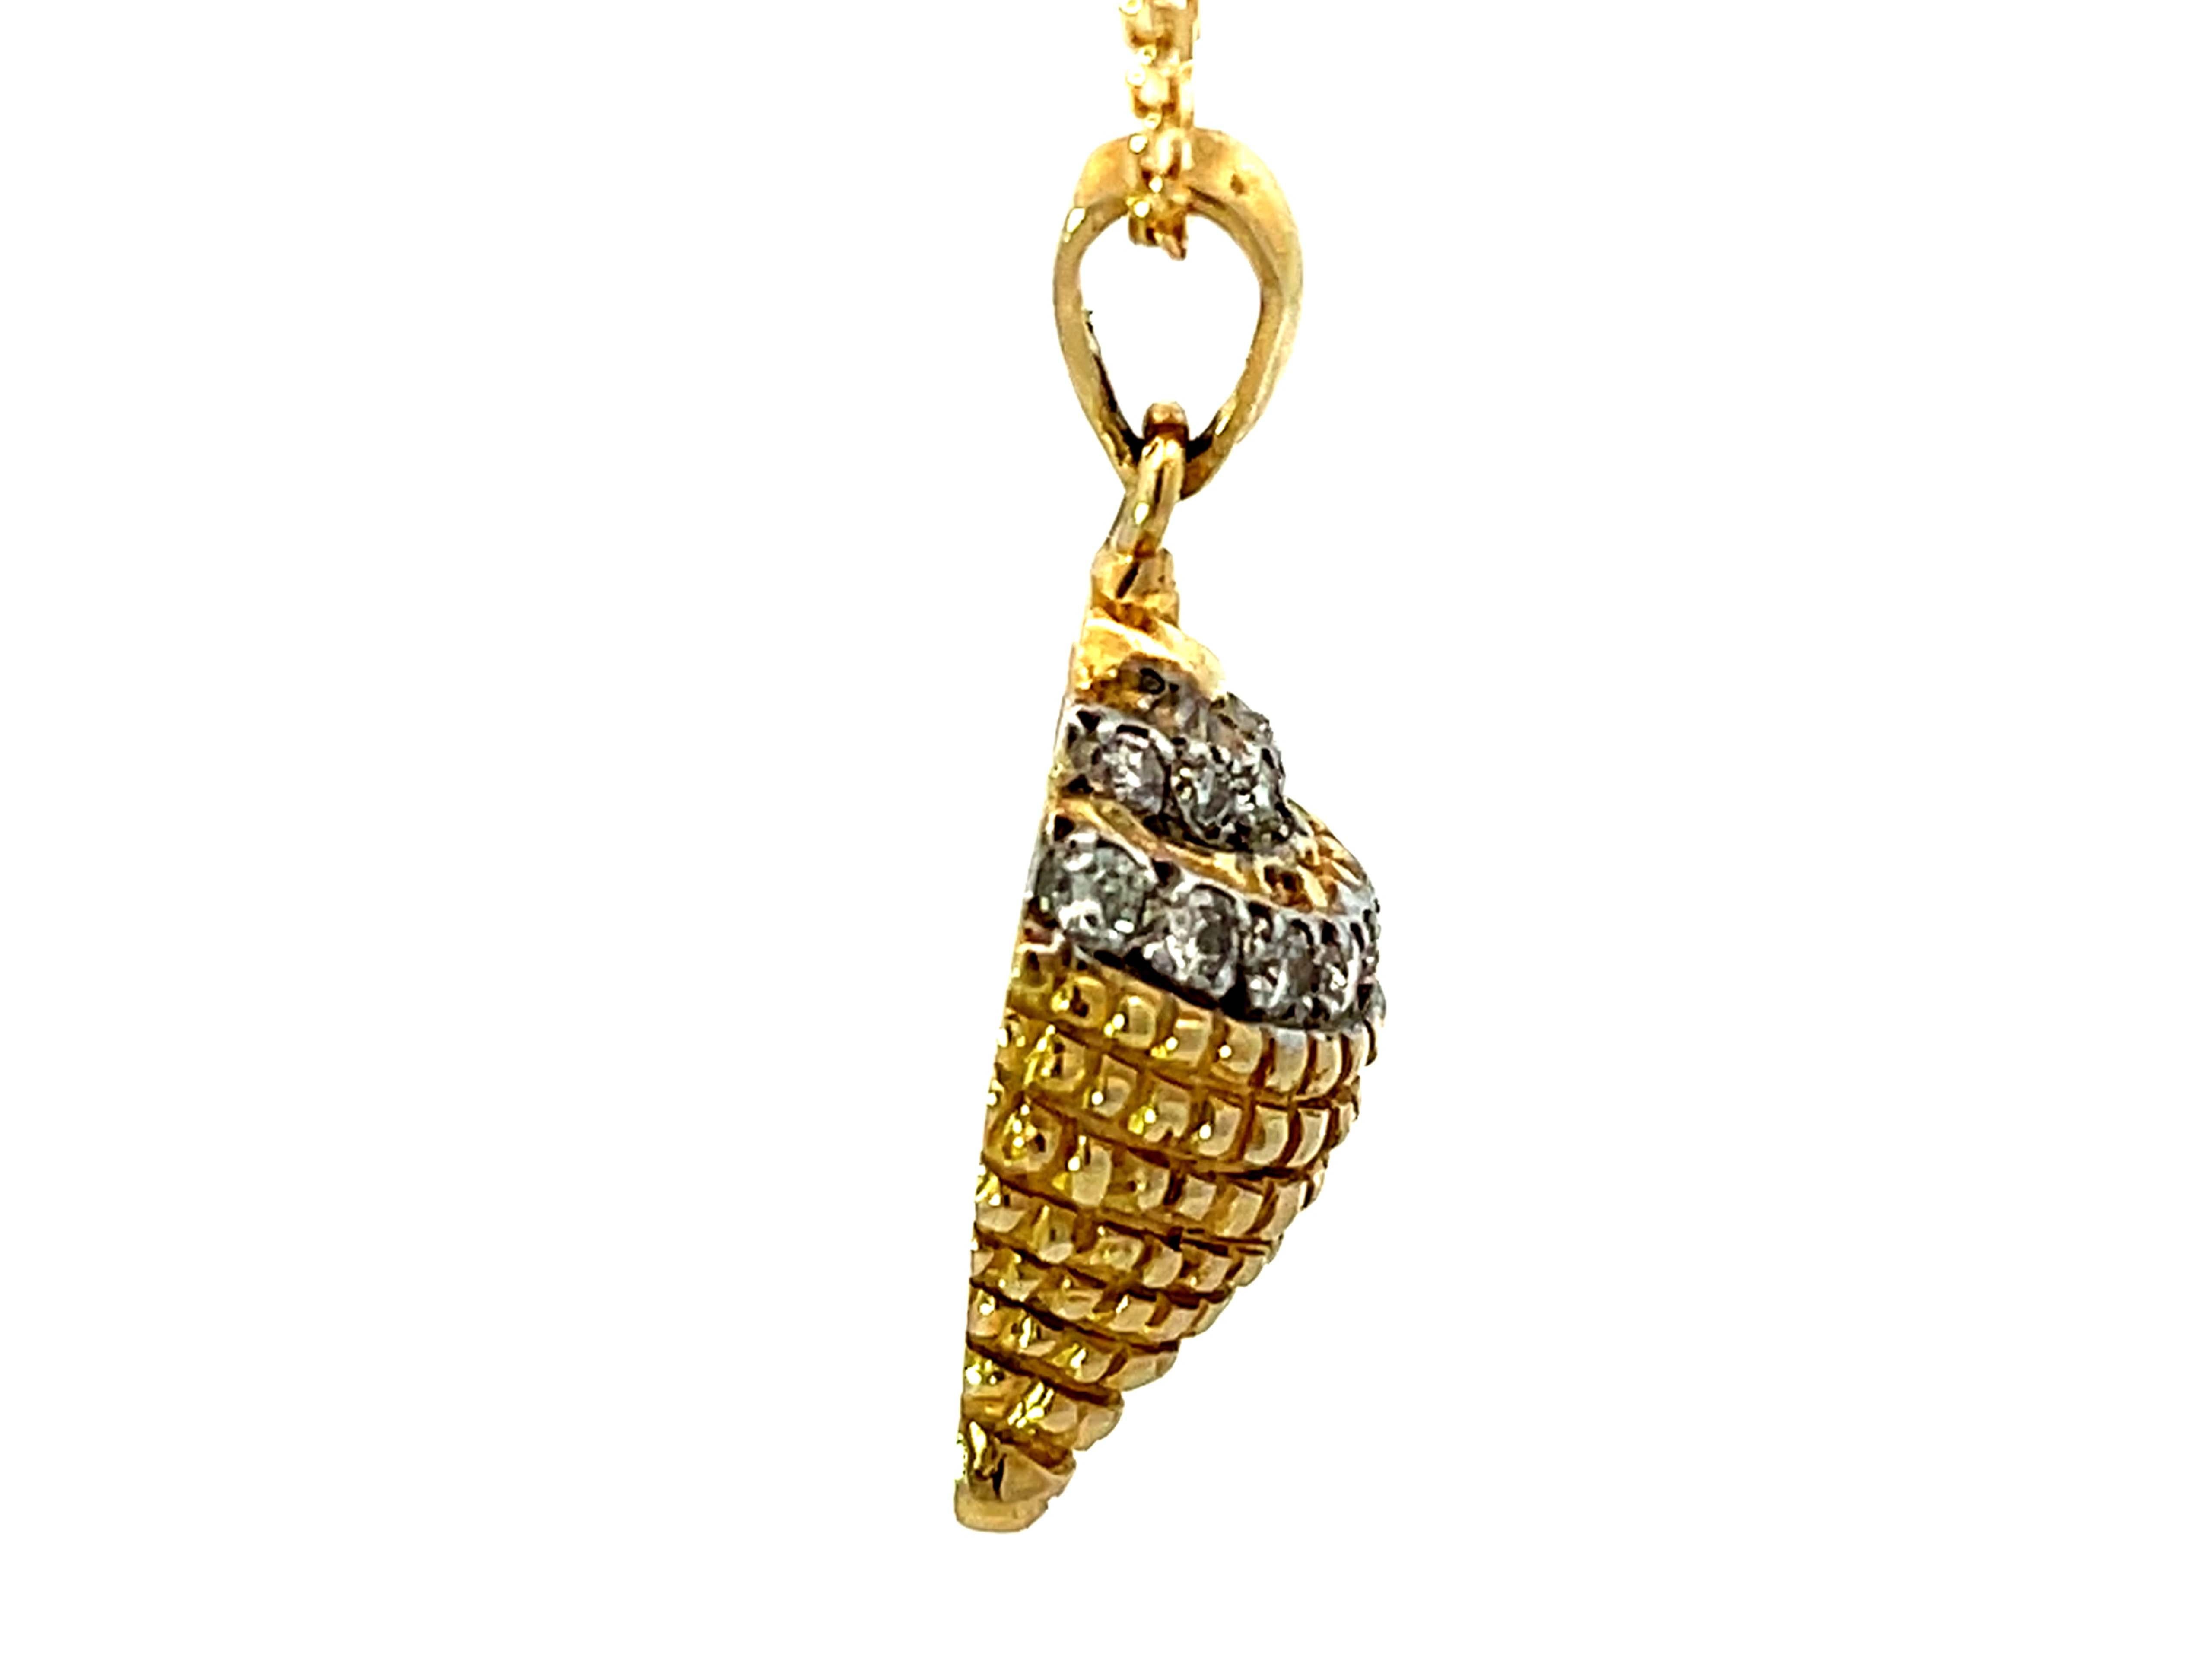 Solid Gold Diamond Seashell Pendant Necklace In Excellent Condition For Sale In Honolulu, HI